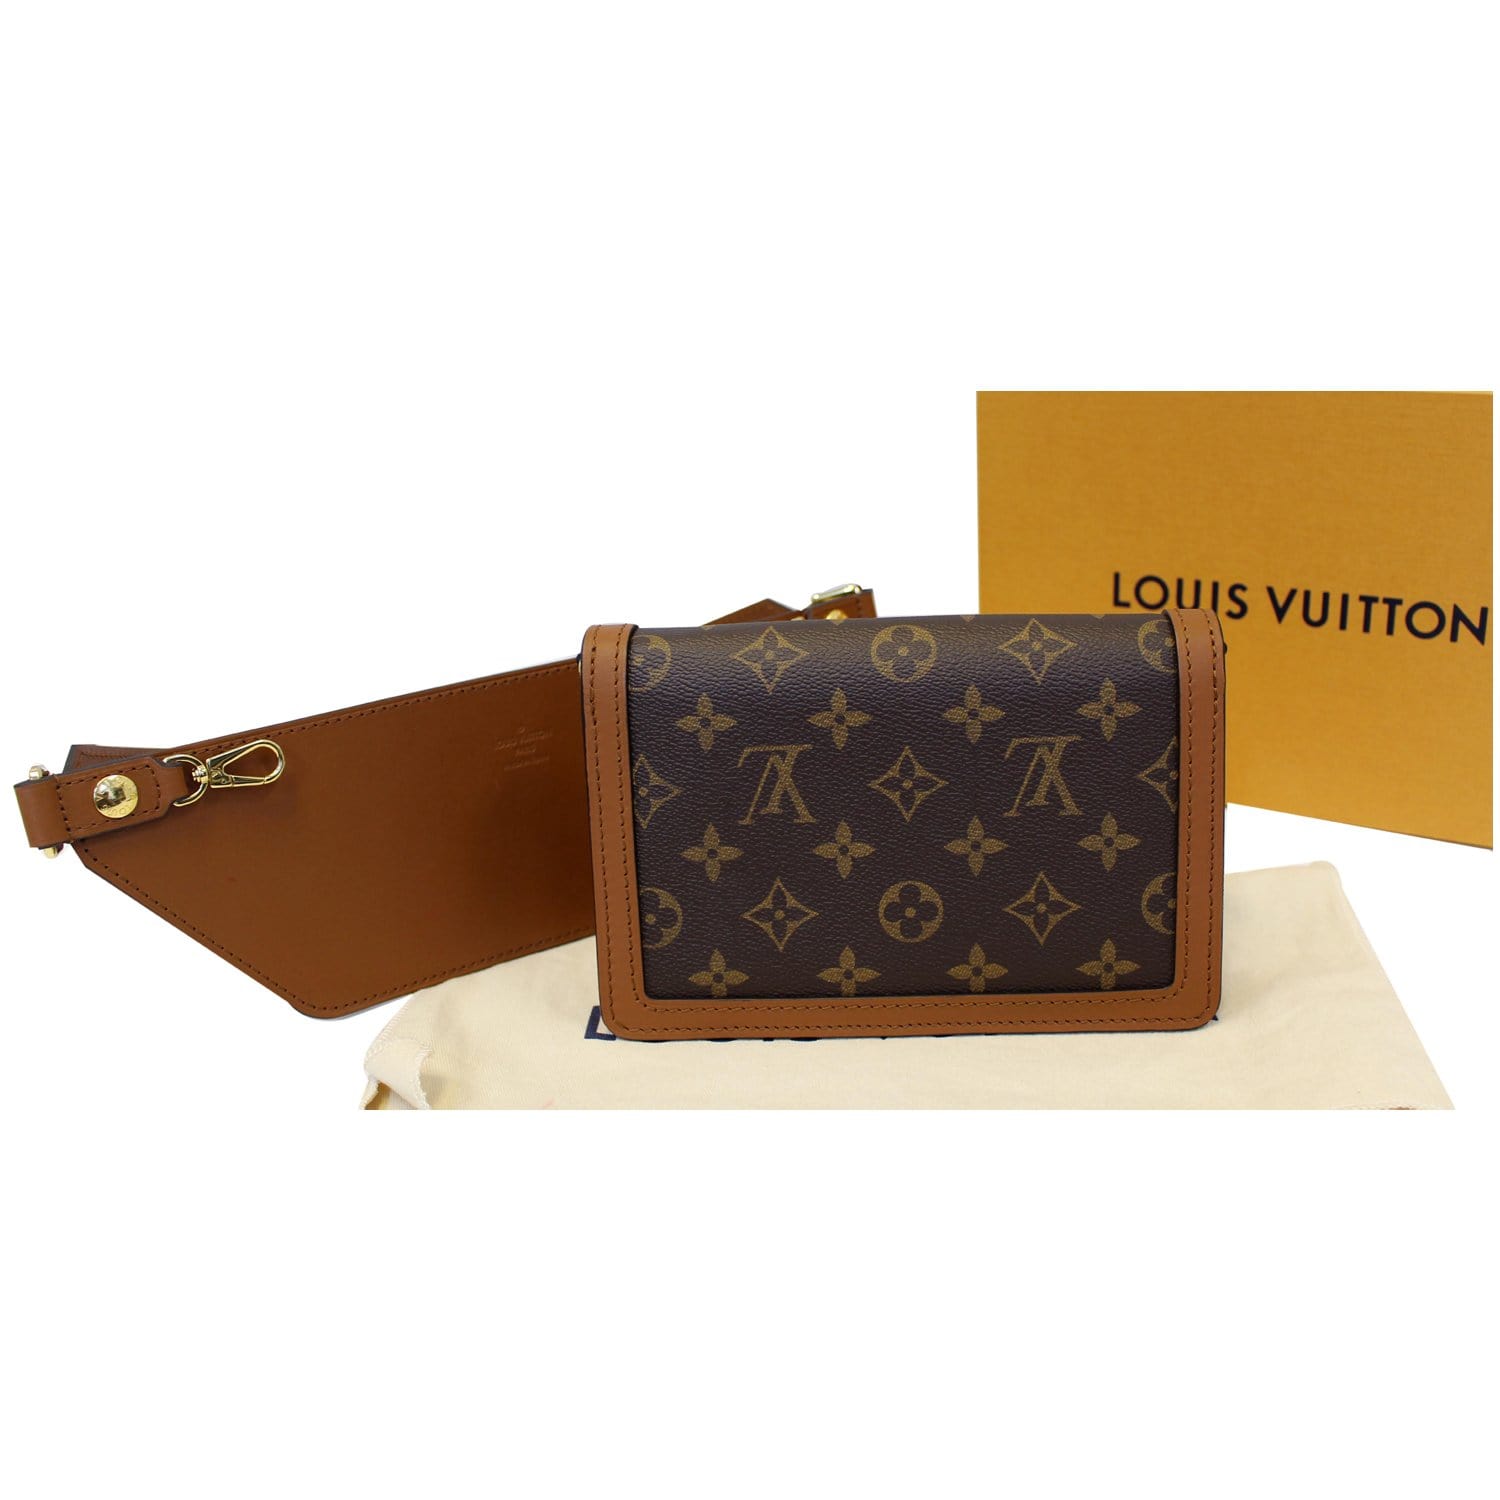 EXTREMELY RARE!😍😍 LV Dauphine bumbag - Pricetagauthentique